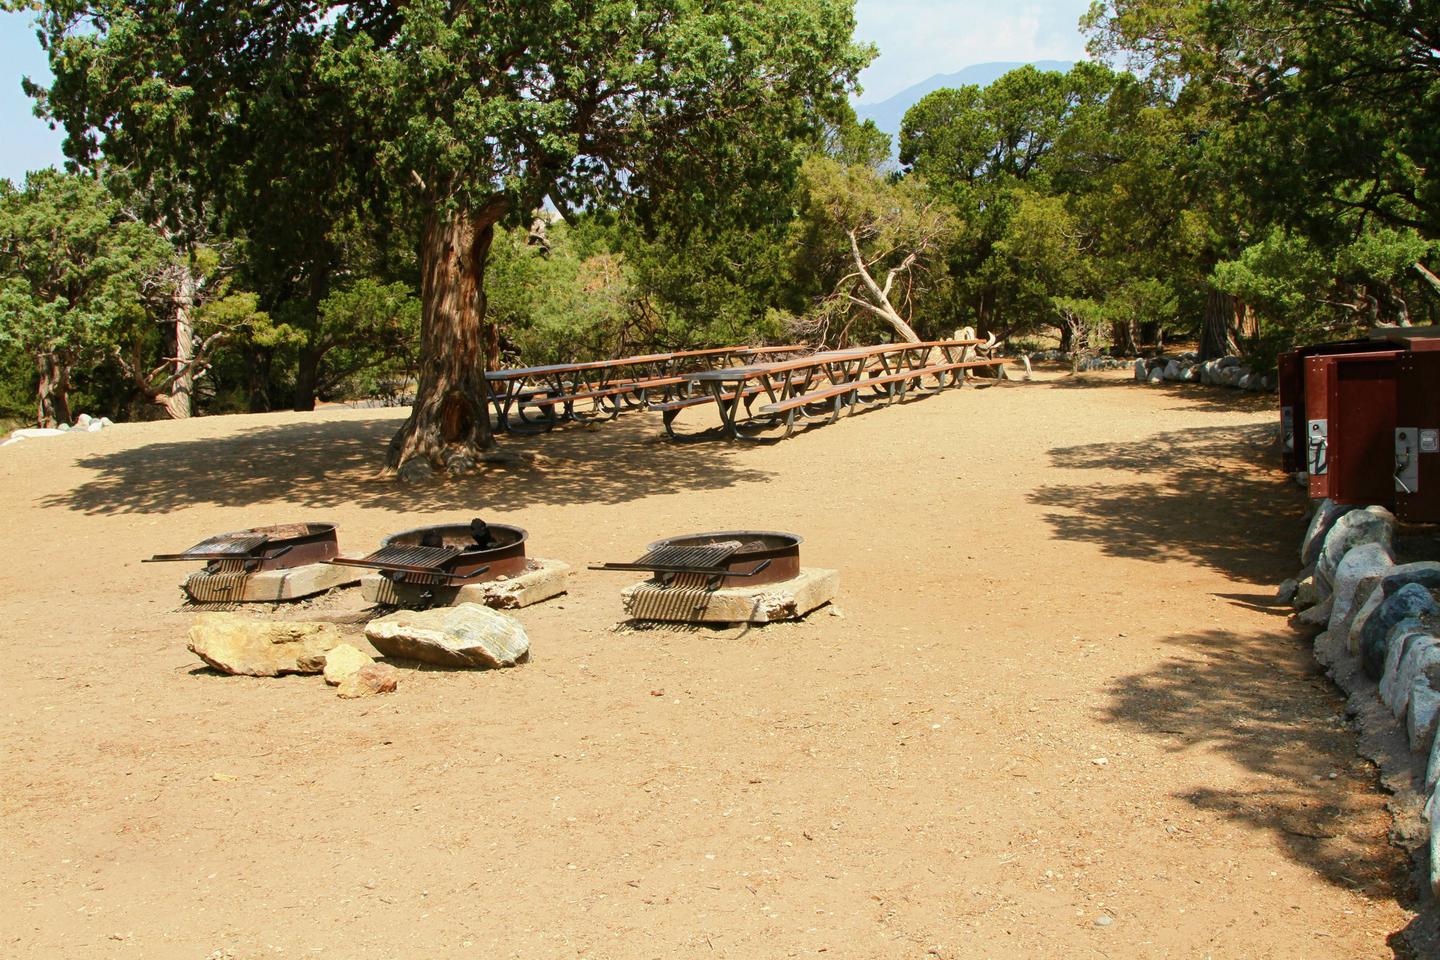 View of Group Site "A' tent area from behind the fire rings, showing the lines of picnic tables and the bear boxes on the side of the site.Group Site A, Pinon Flats Campground